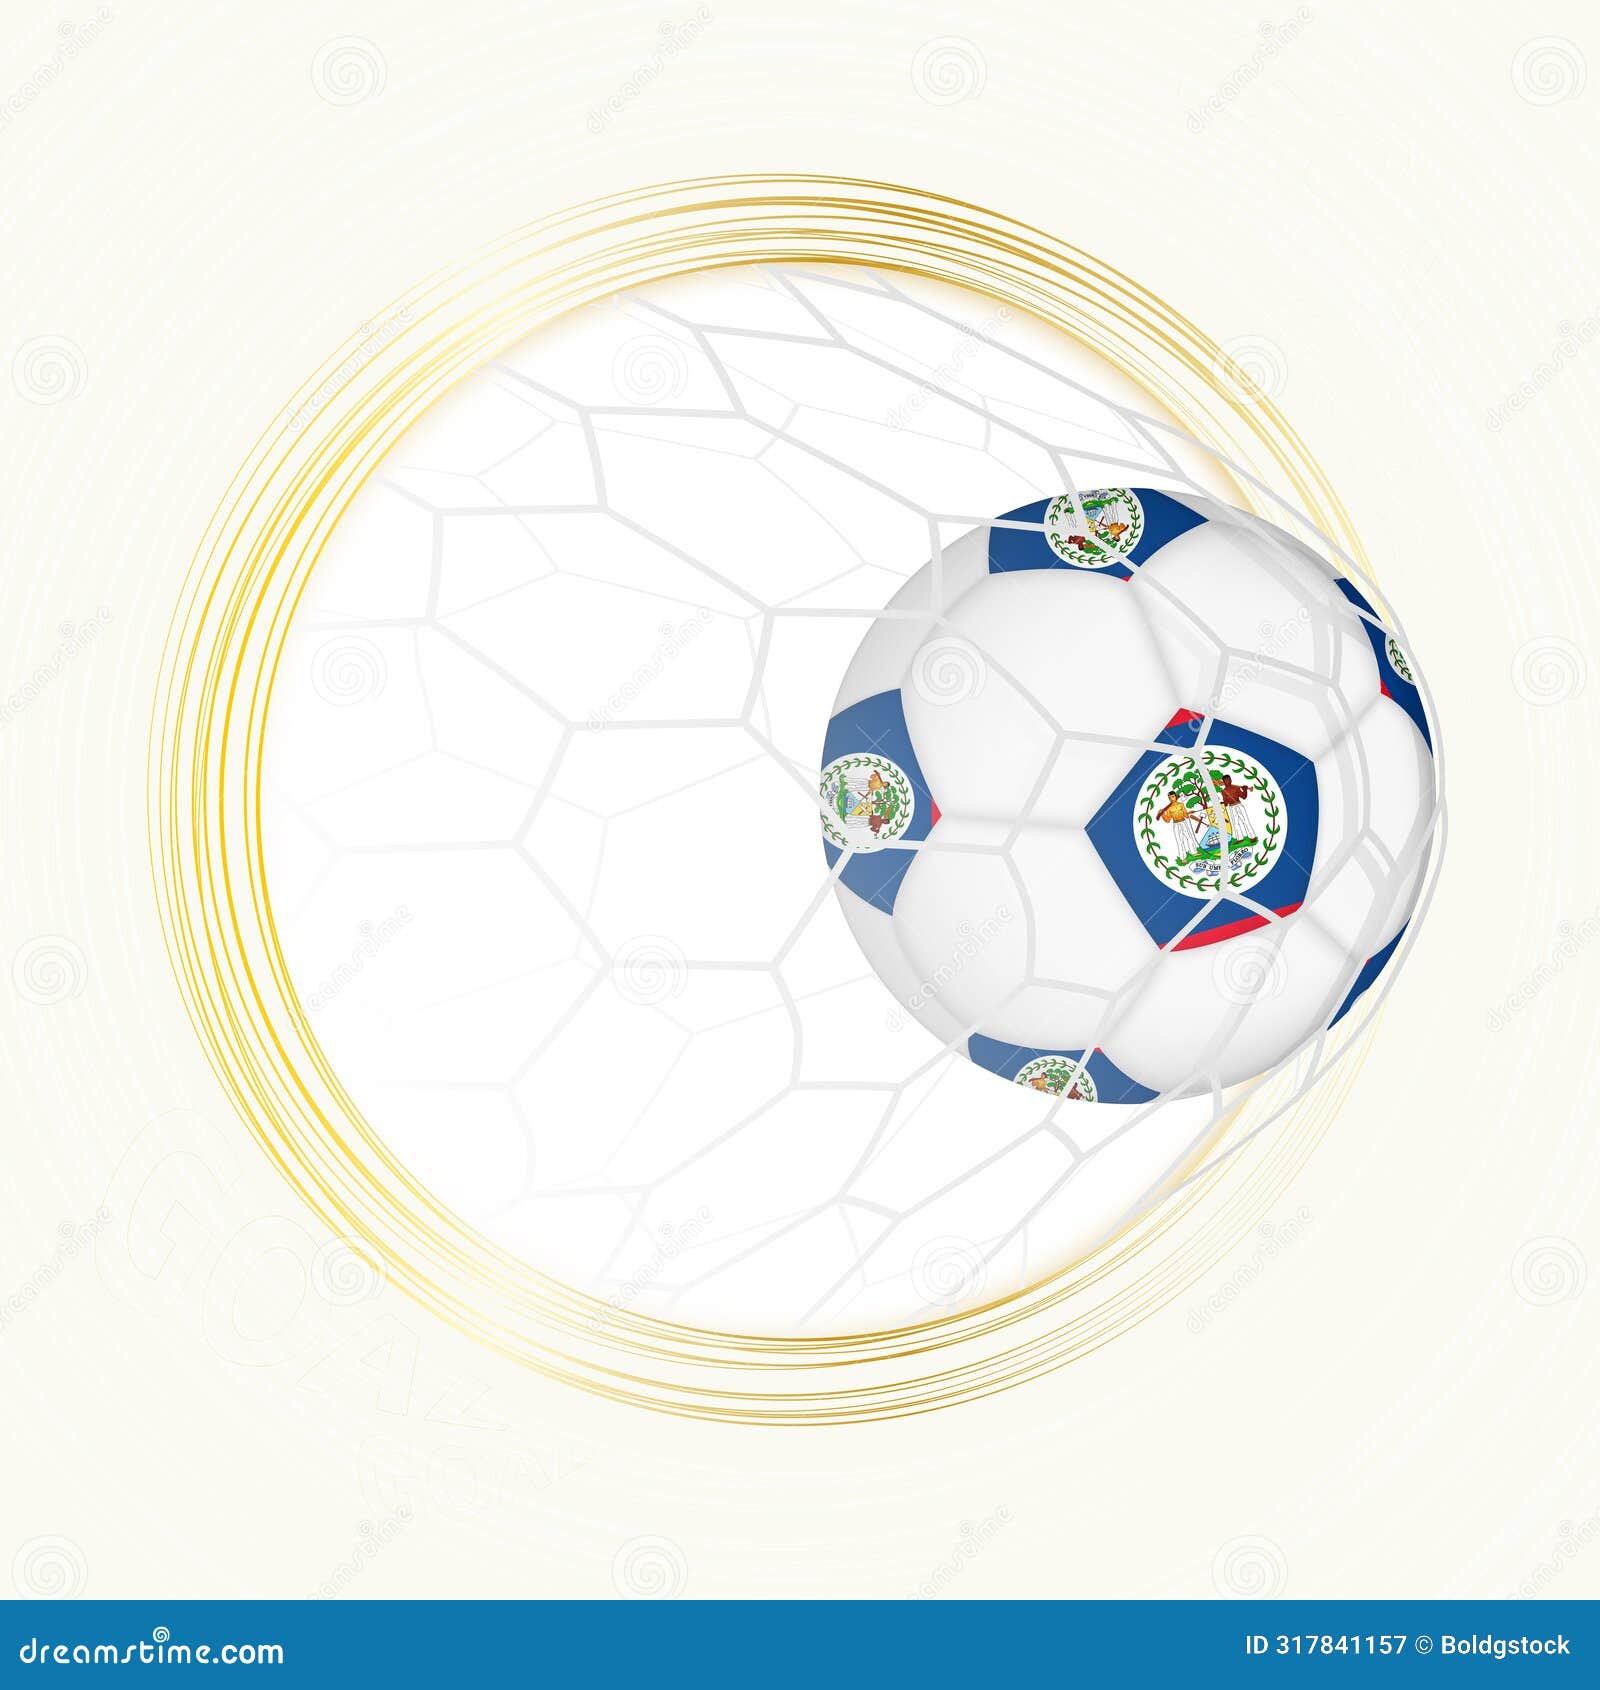 football emblem with football ball with flag of guatemala in net, scoring goal for guatemala